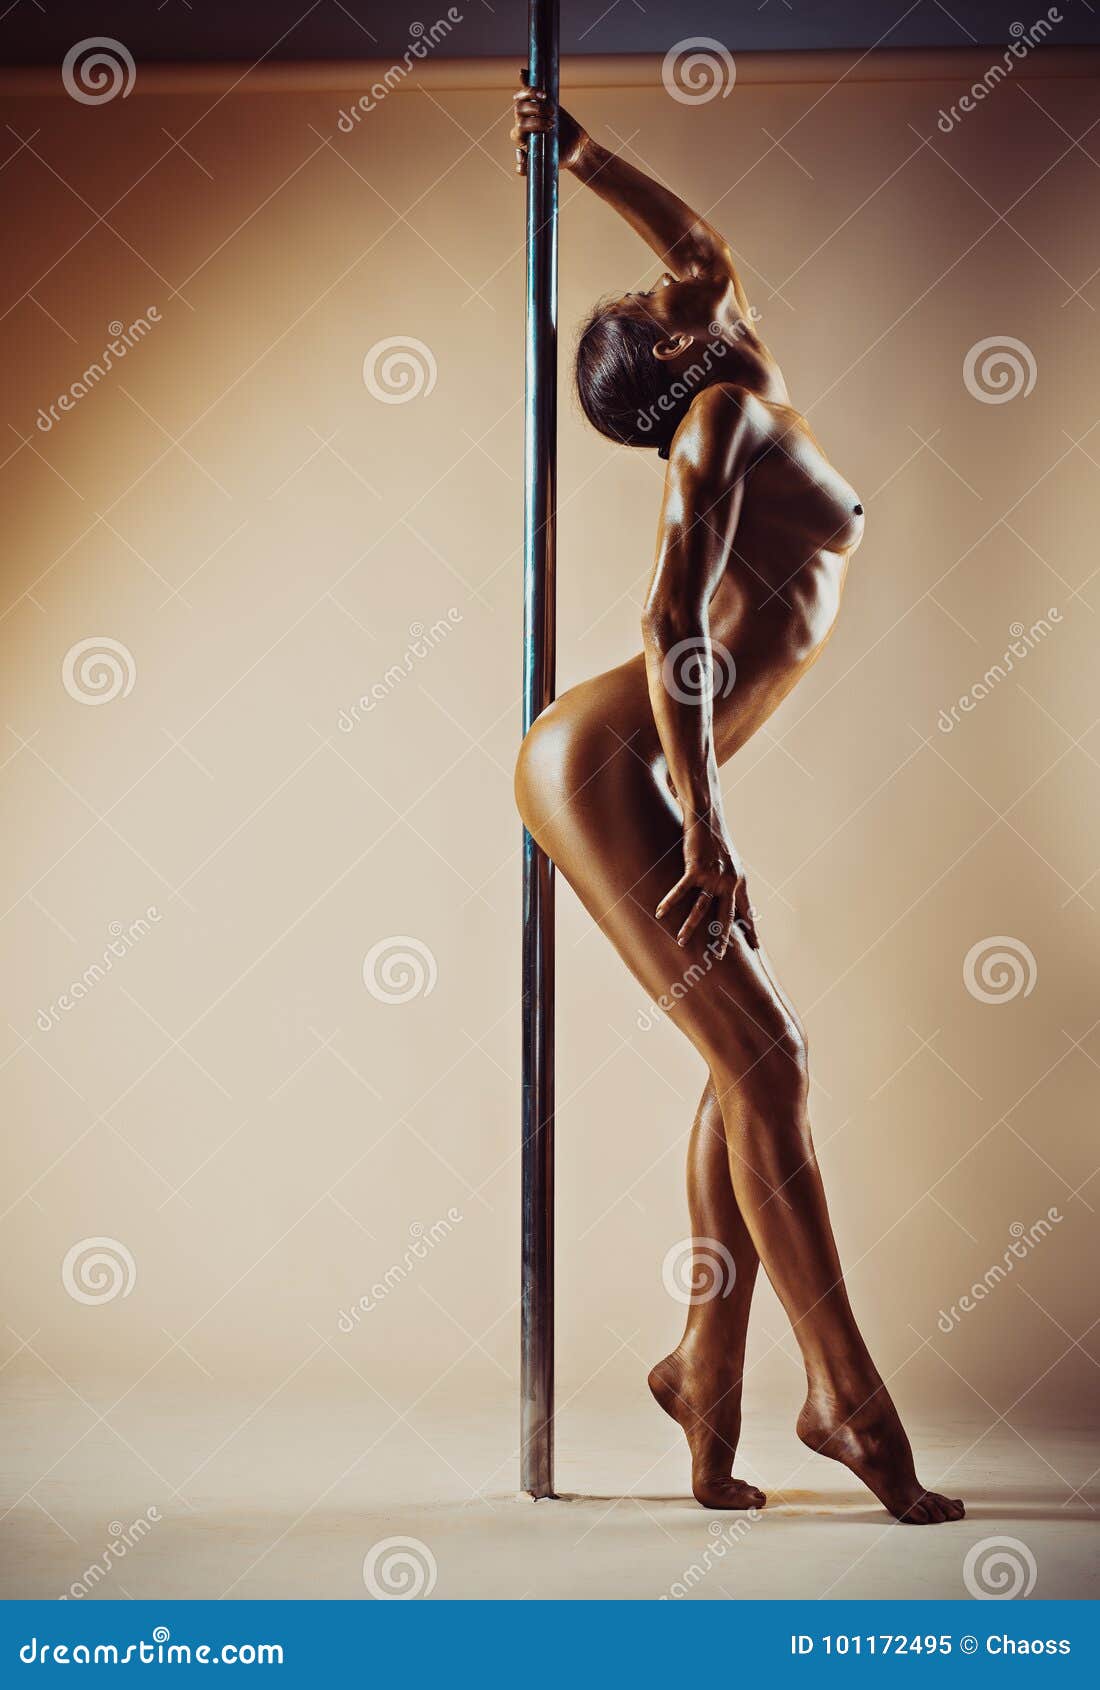 bobby tabor recommends nude women pole dancing pic